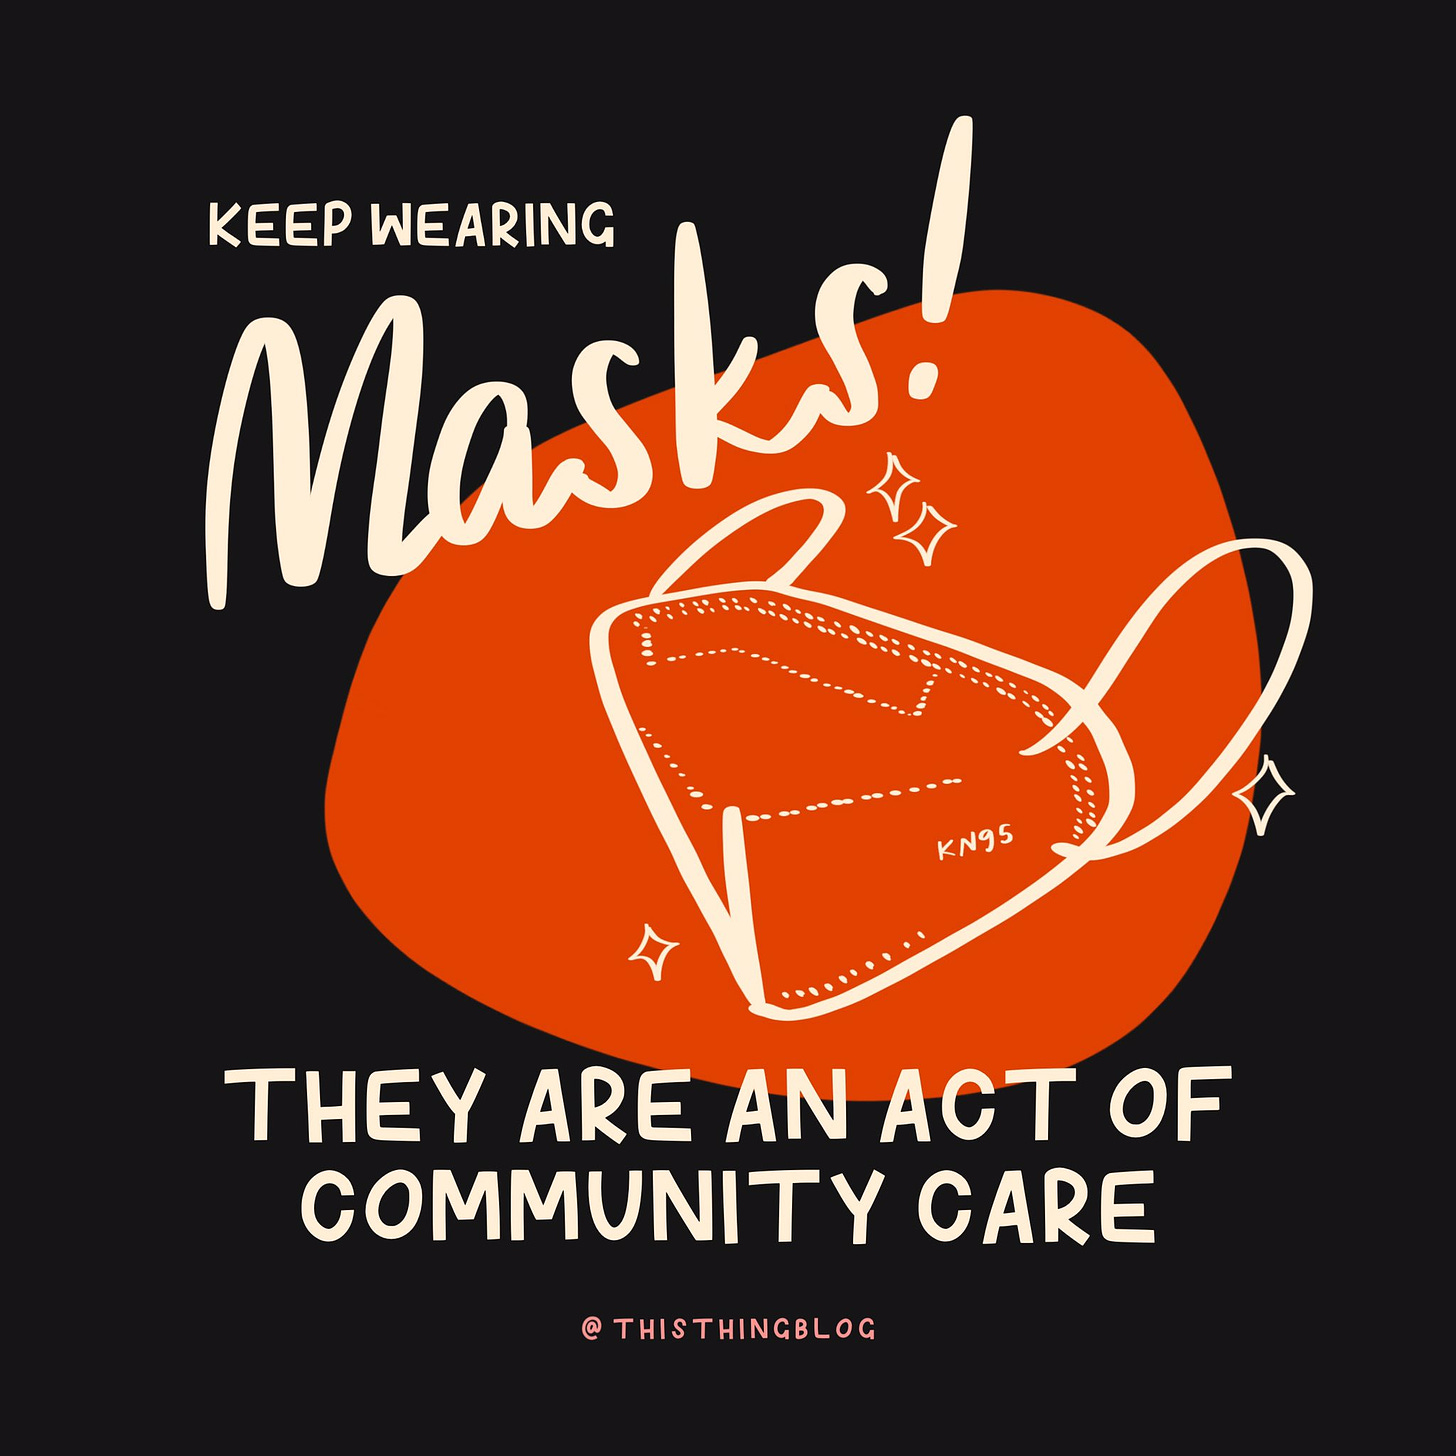 Text reads ‘keep wearing masks! They are an act of community care’. A line illustration of a face mask is shown.